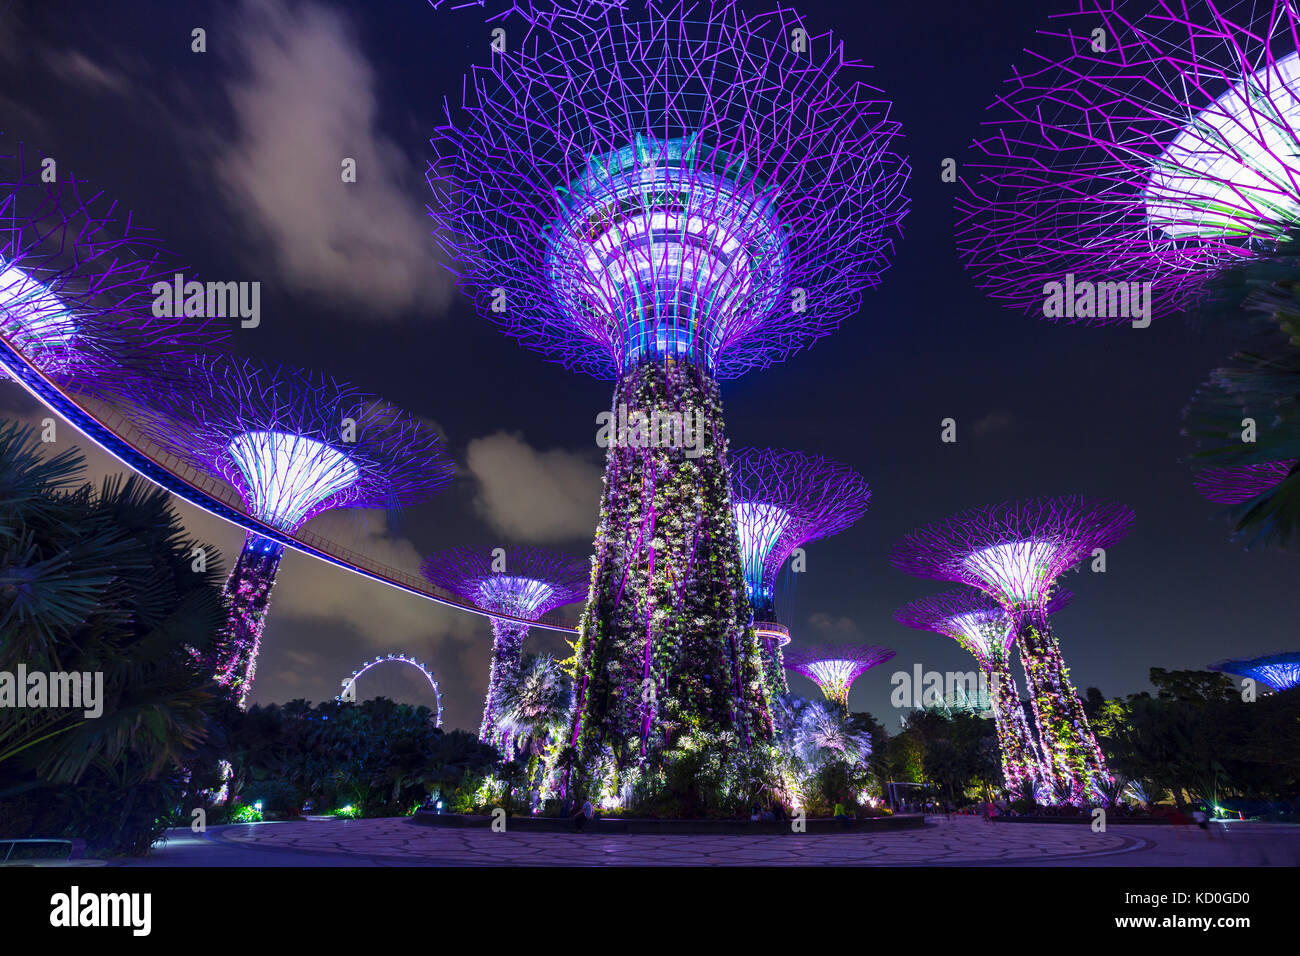 Purple Supertree Grove at night, Singapore, South East Asia Stock Photo